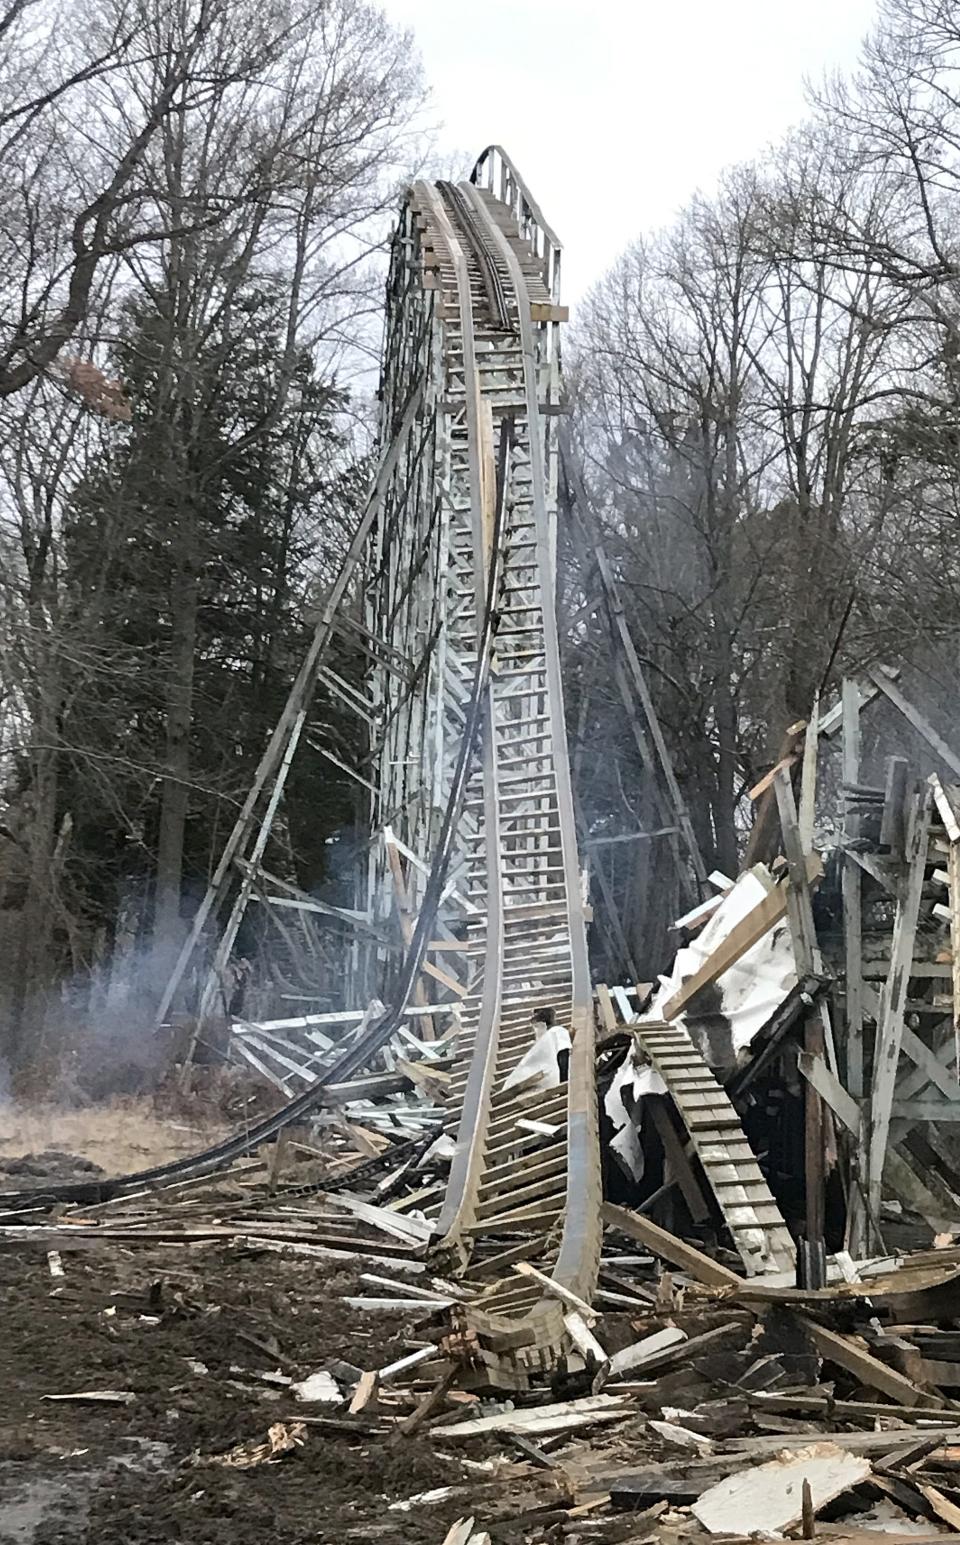 The first hill of the Blue Streak roller coaster at Conneaut Lake Park in Summit Township, Crawford County, is shown on Jan. 5, 2022, one day after a fire heavily damaged the coaster station, where patrons boarded the ride. The iconic wooden roller coaster, which opened in 1938, was being demolished on Monday before the fire began.